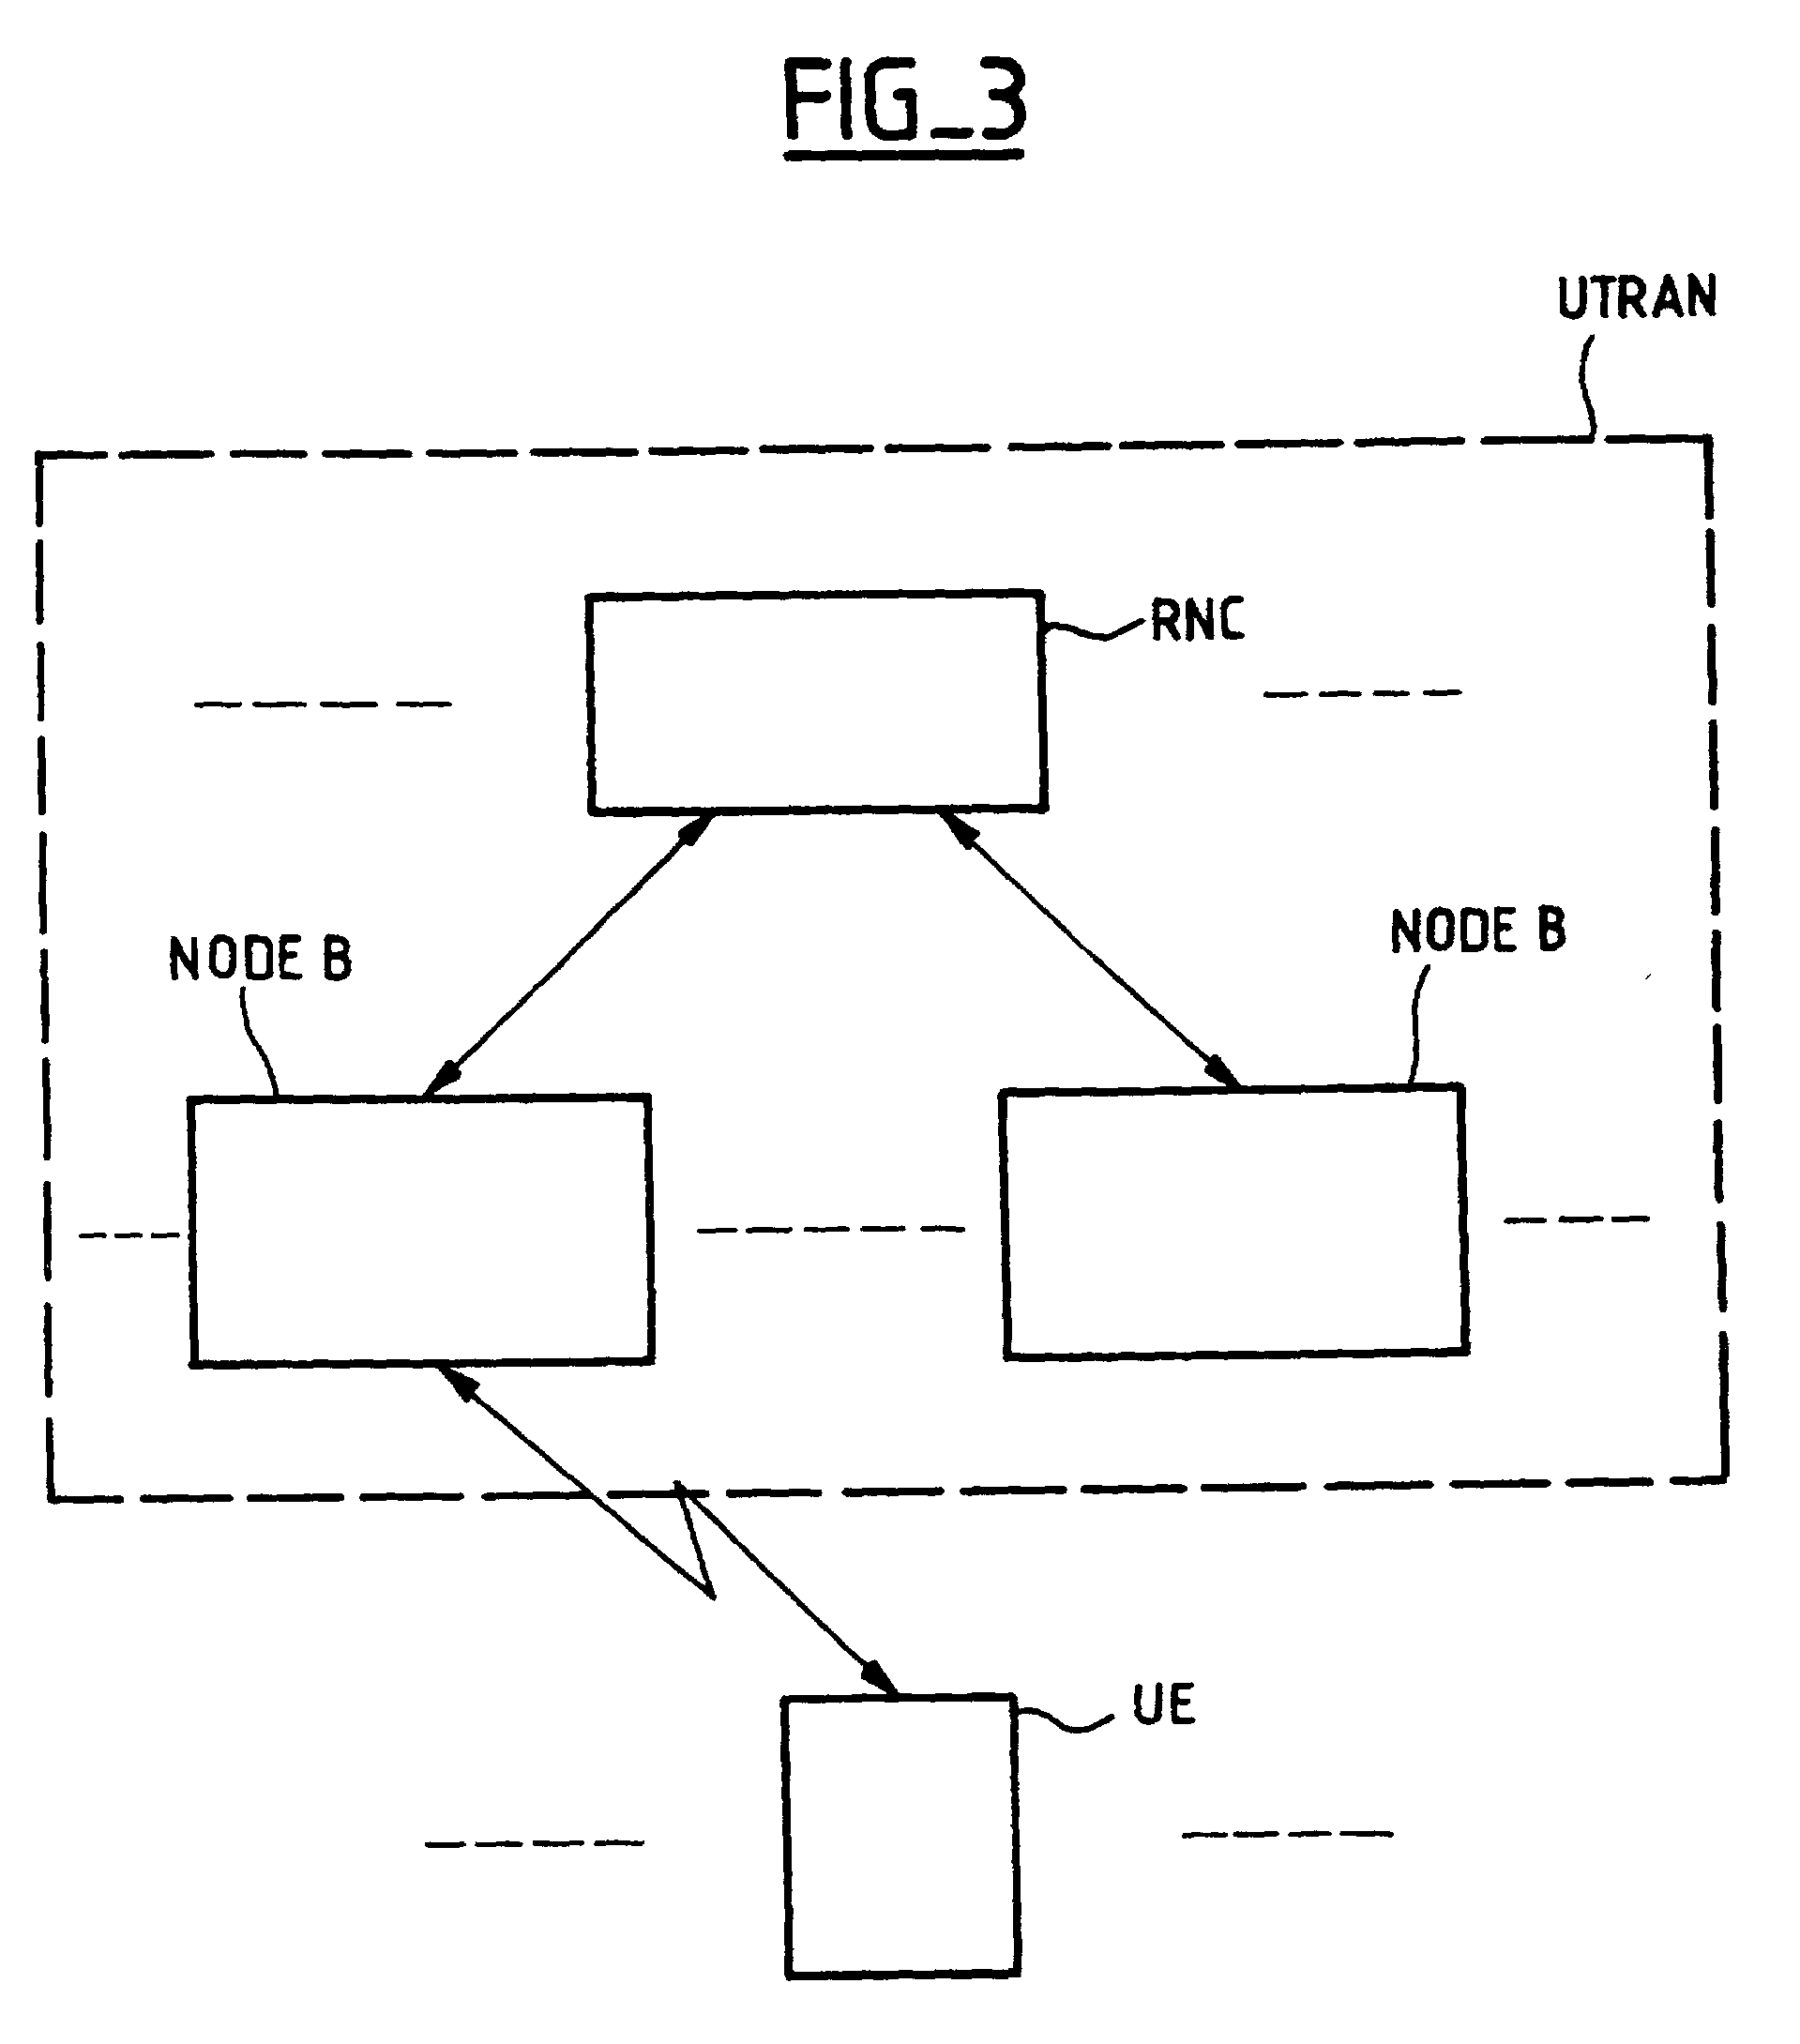 Method of adjusting the target value of an inner power control loop in a mobile radiocommunications system